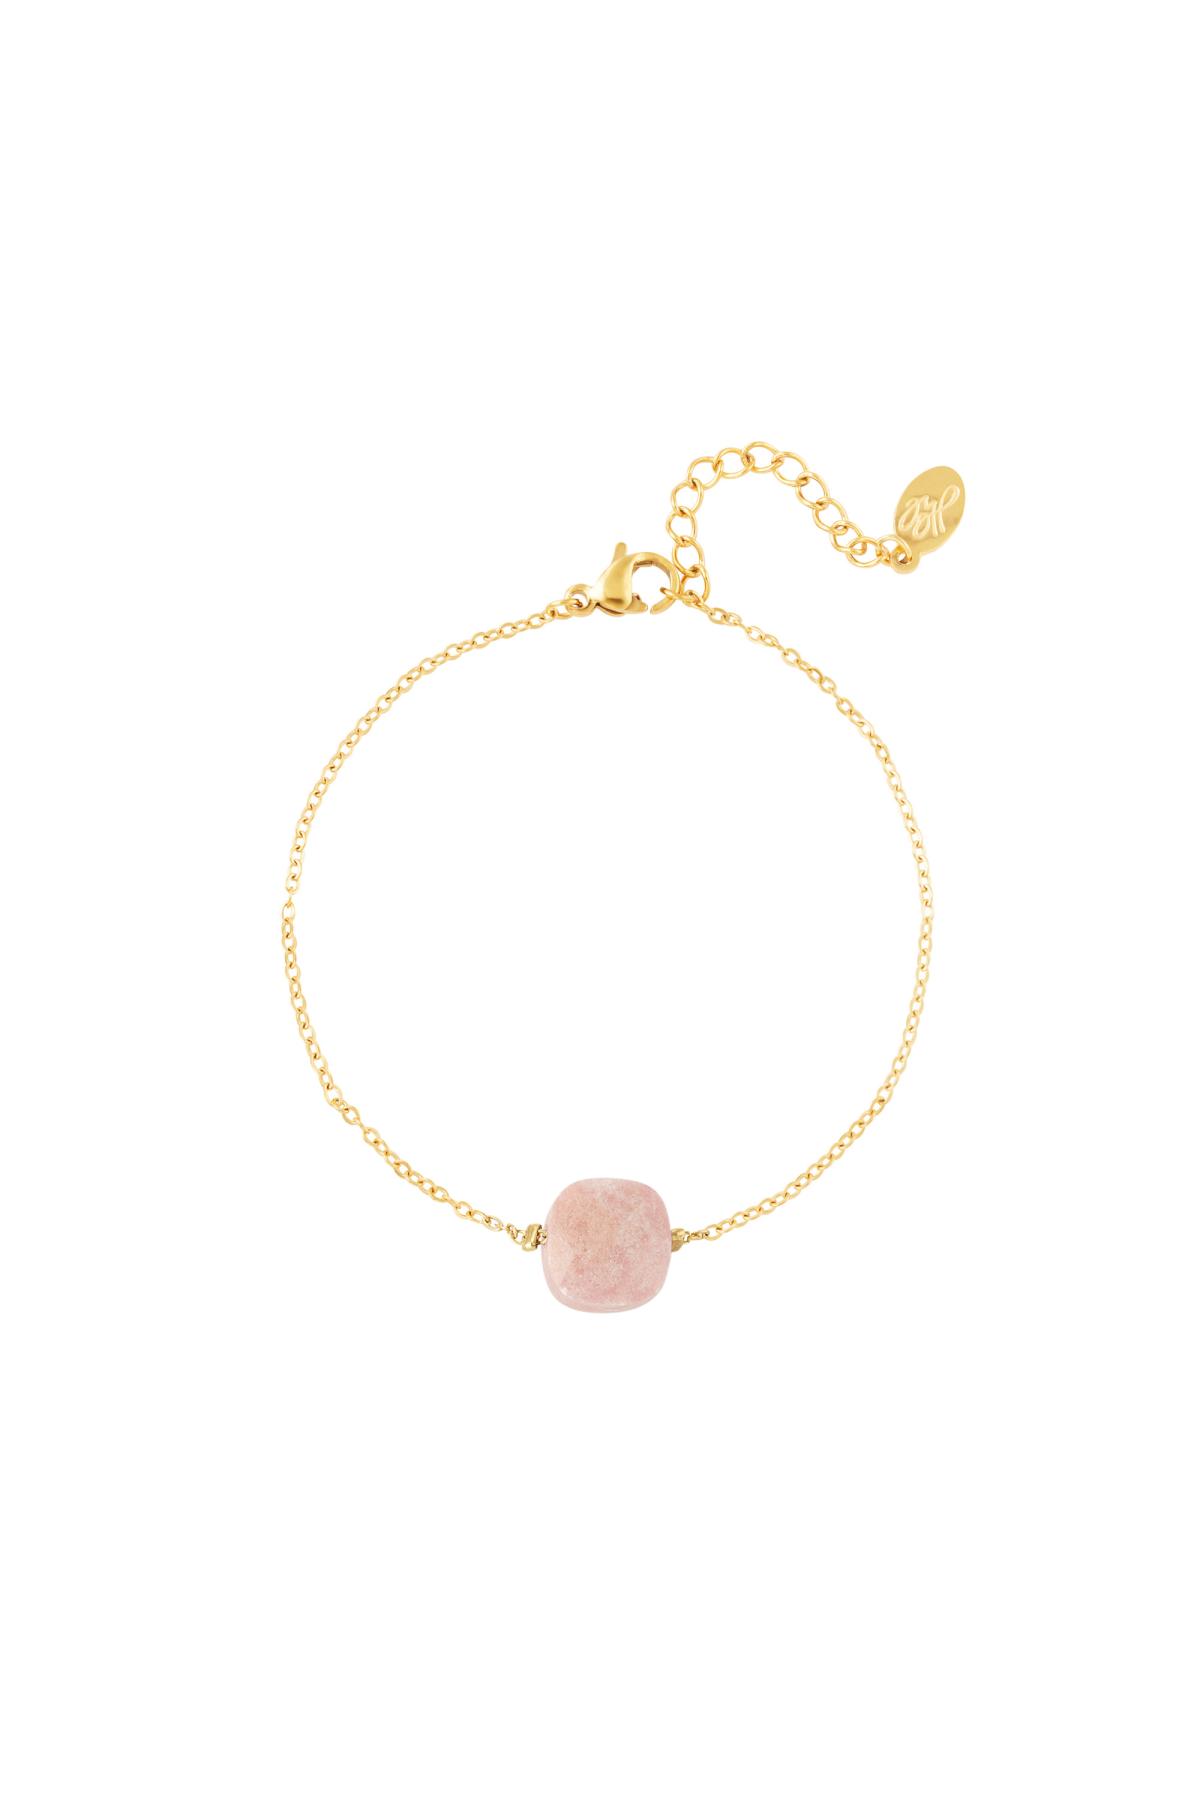 Bracelet with stone - Natural stones collection Pink &amp; Gold Stainless Steel